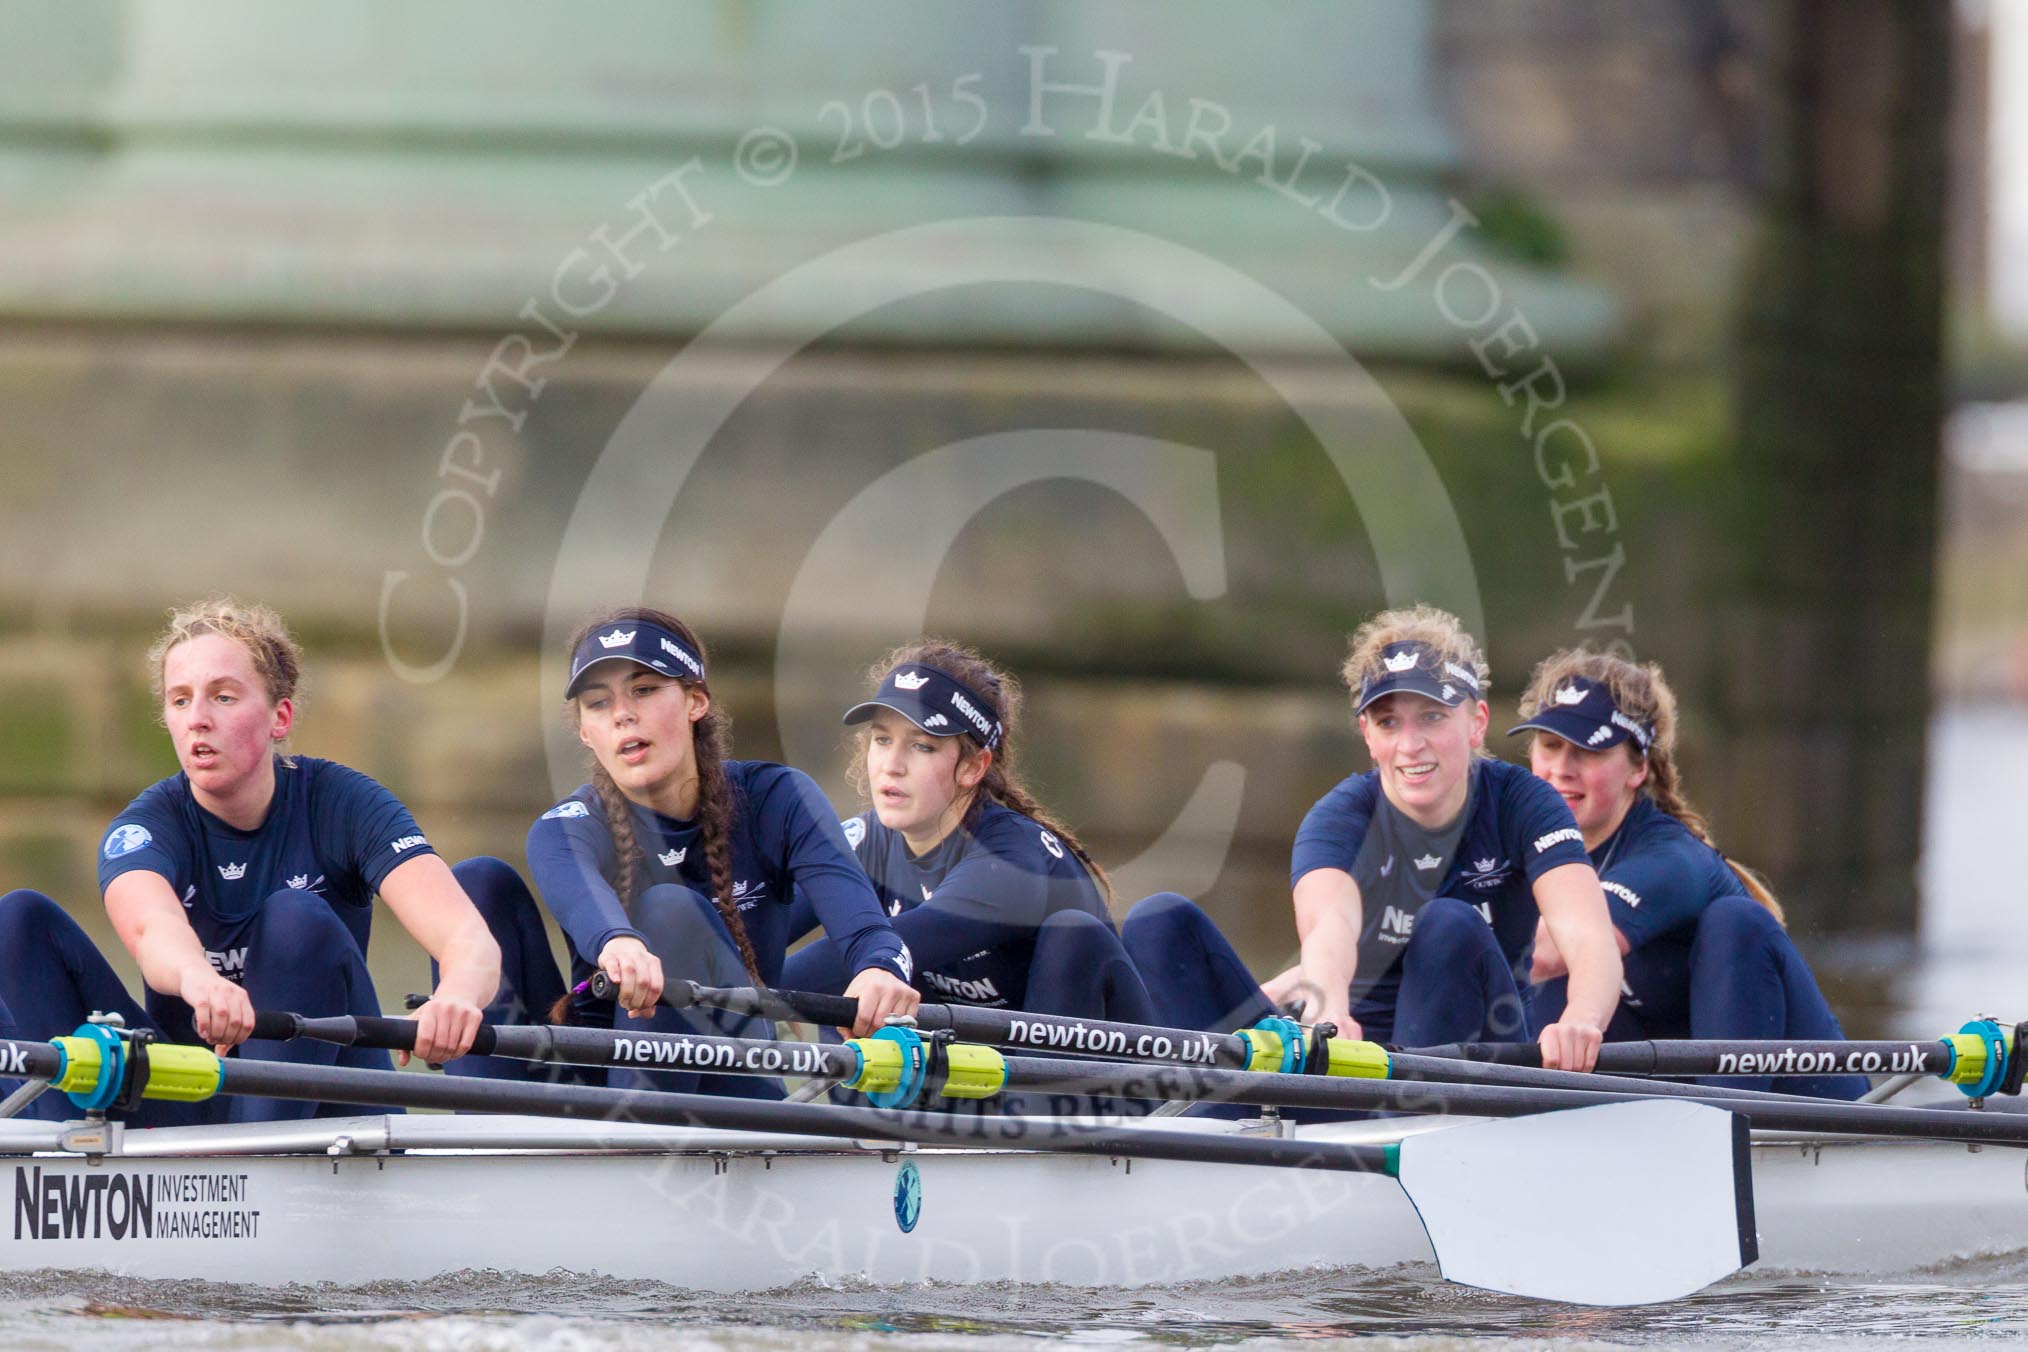 The Boat Race season 2016 - Women's Boat Race Trial Eights (OUWBC, Oxford): "Scylla" passing Hammersmith Bridge, here 5-Anastasia Chitty, 4-Rebecca Te Water Naude, 3-Elettra Ardissino, 2-Merel Lefferts, bow-Issy Dodds.
River Thames between Putney Bridge and Mortlake,
London SW15,

United Kingdom,
on 10 December 2015 at 12:25, image #209